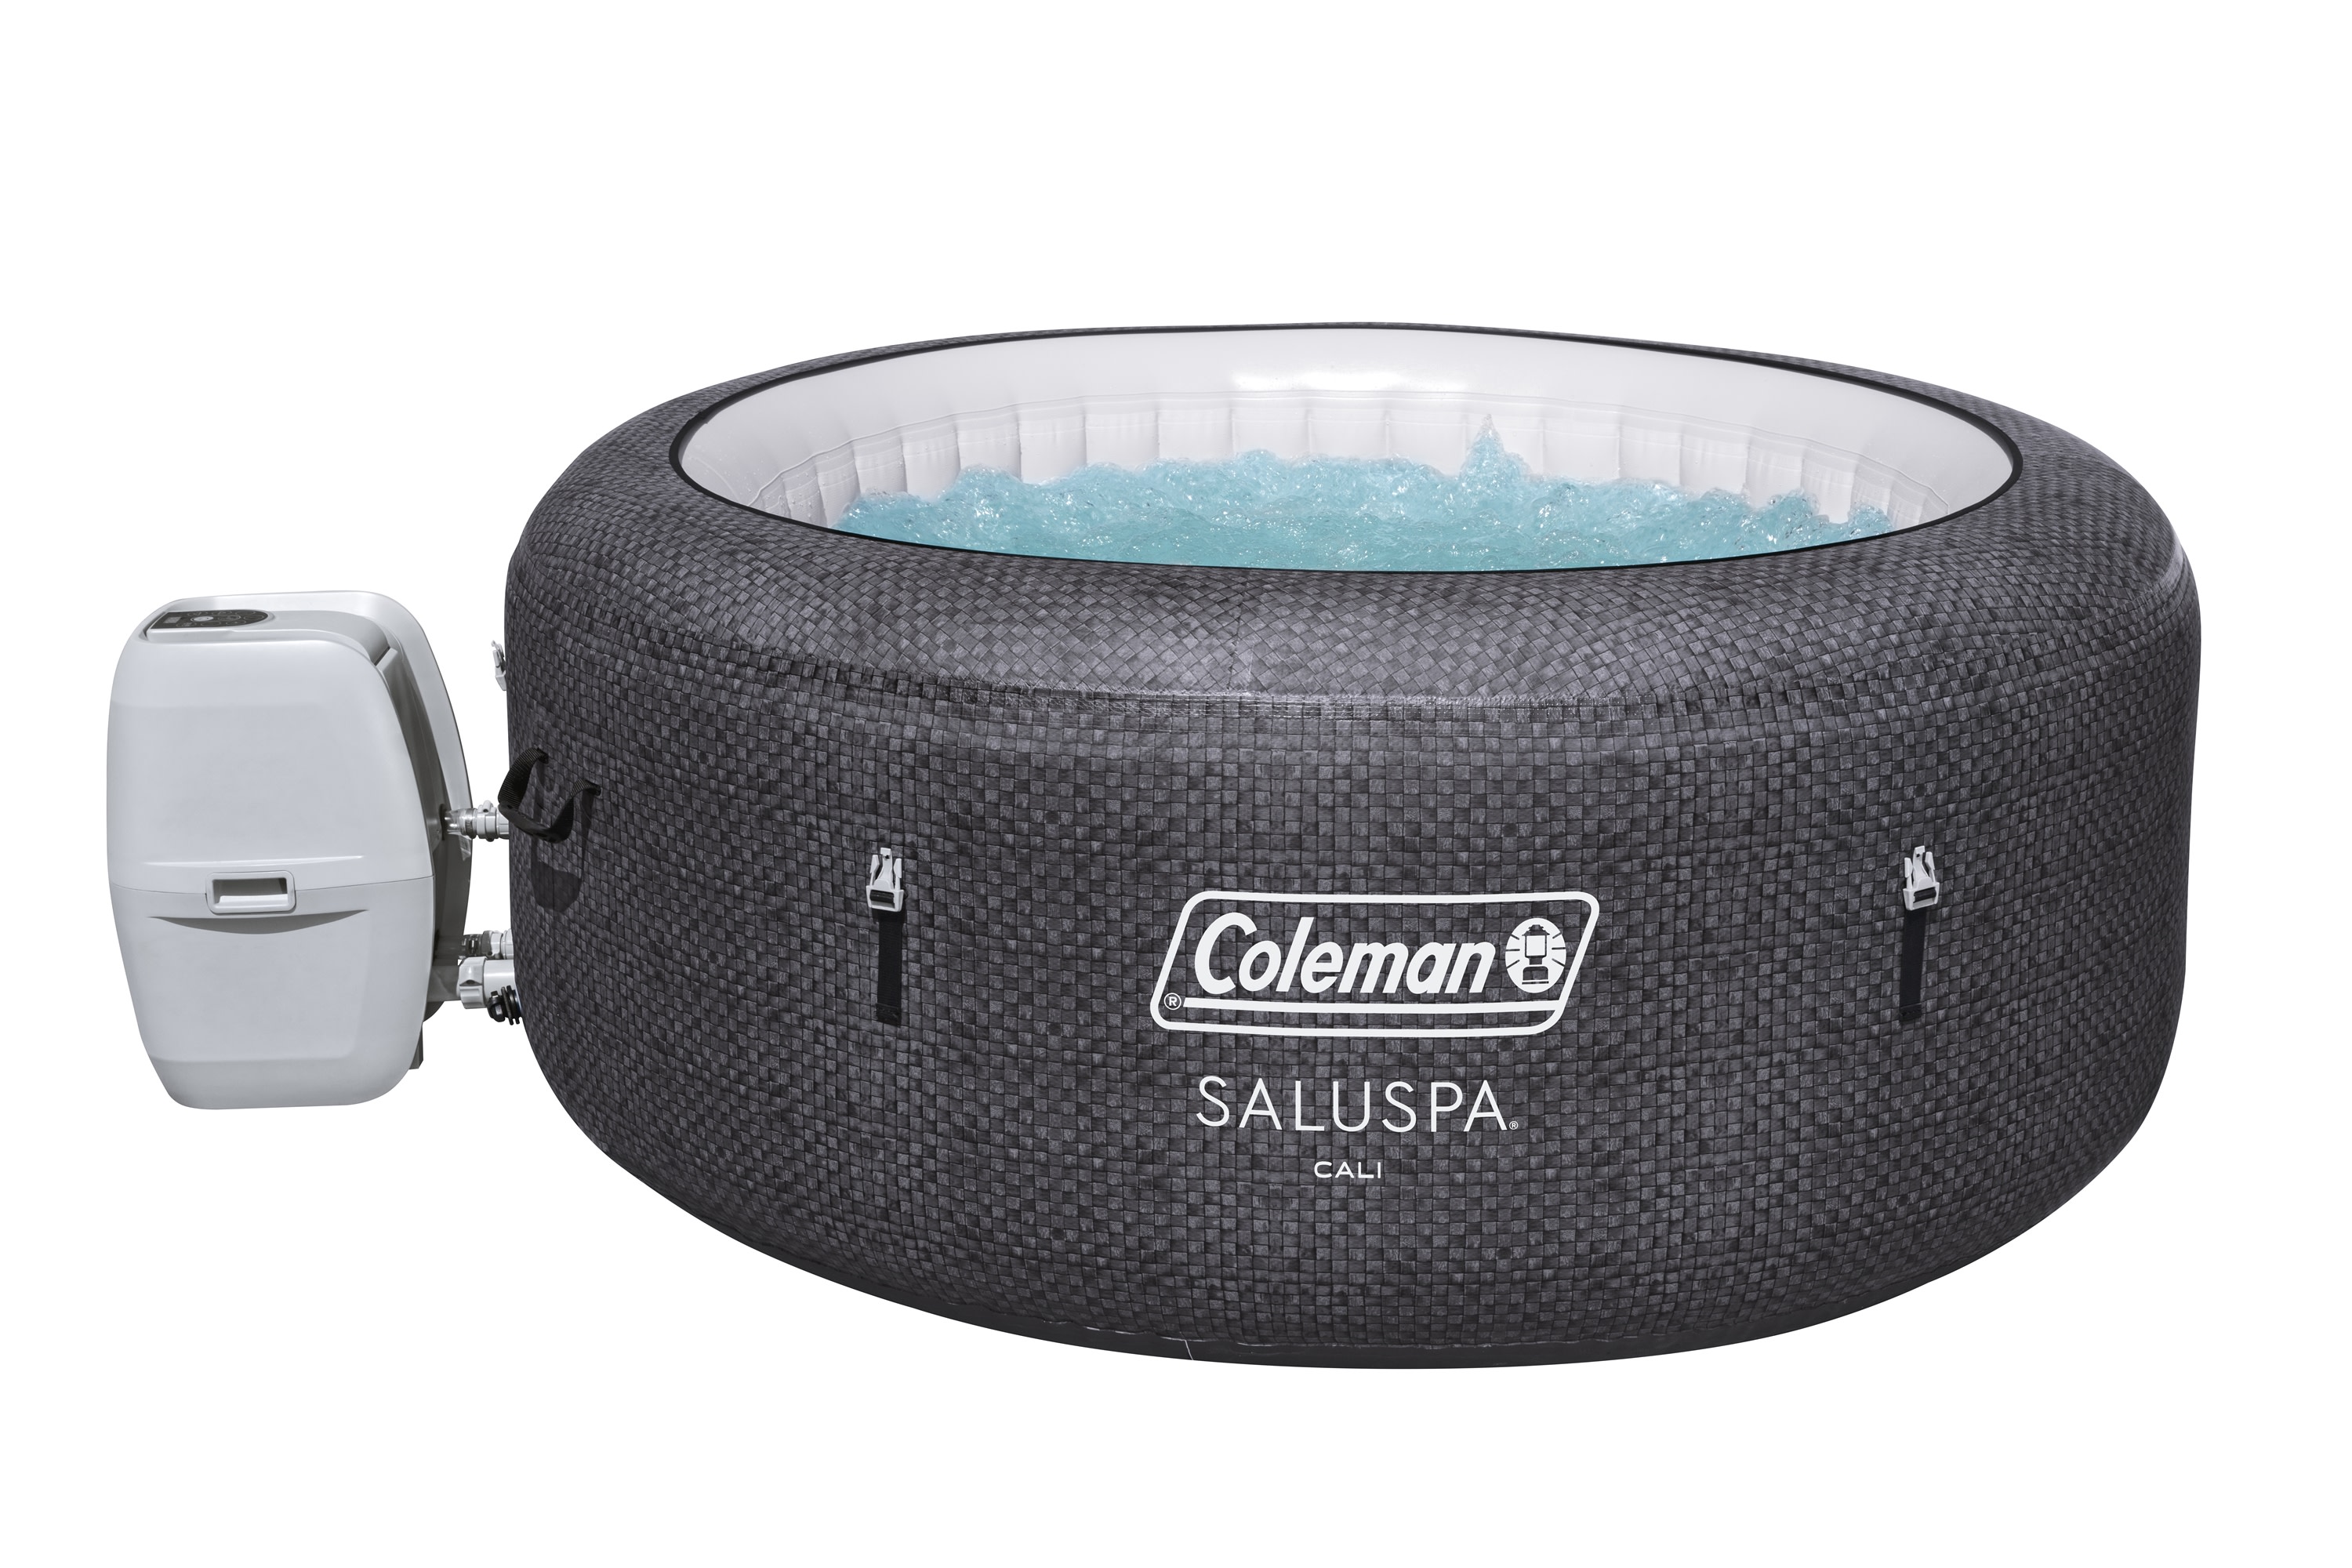 Coleman Cali Energy Sense 177 gal. Spring Inflatable Hot Tub Spa 2-4 Person, 104˚F - image 1 of 8